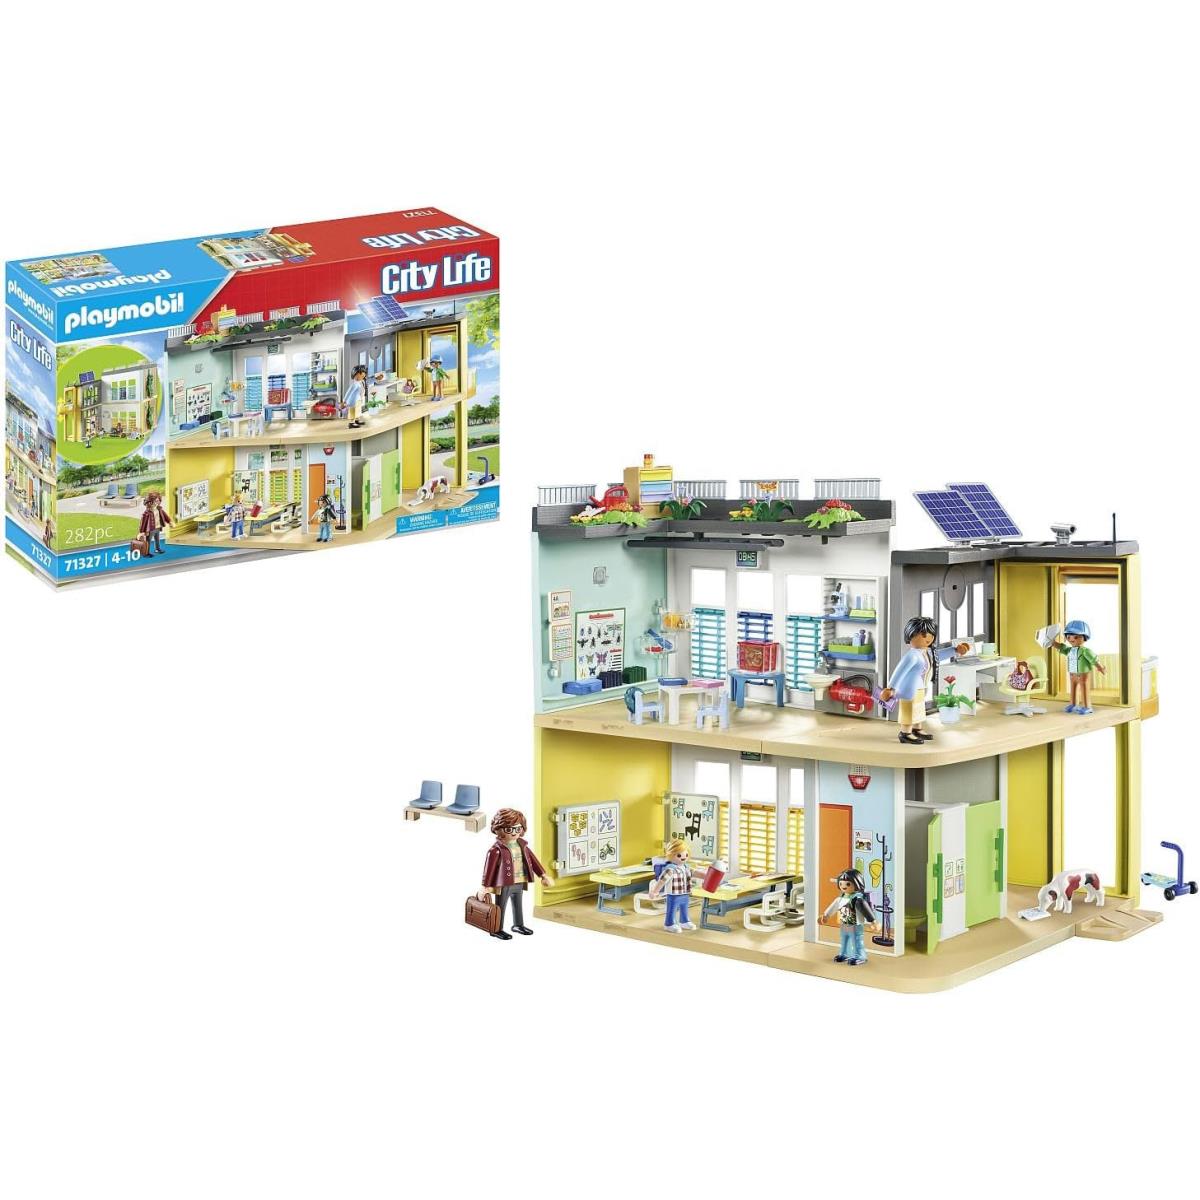 Playmobil Large School 71327 Toy Gift